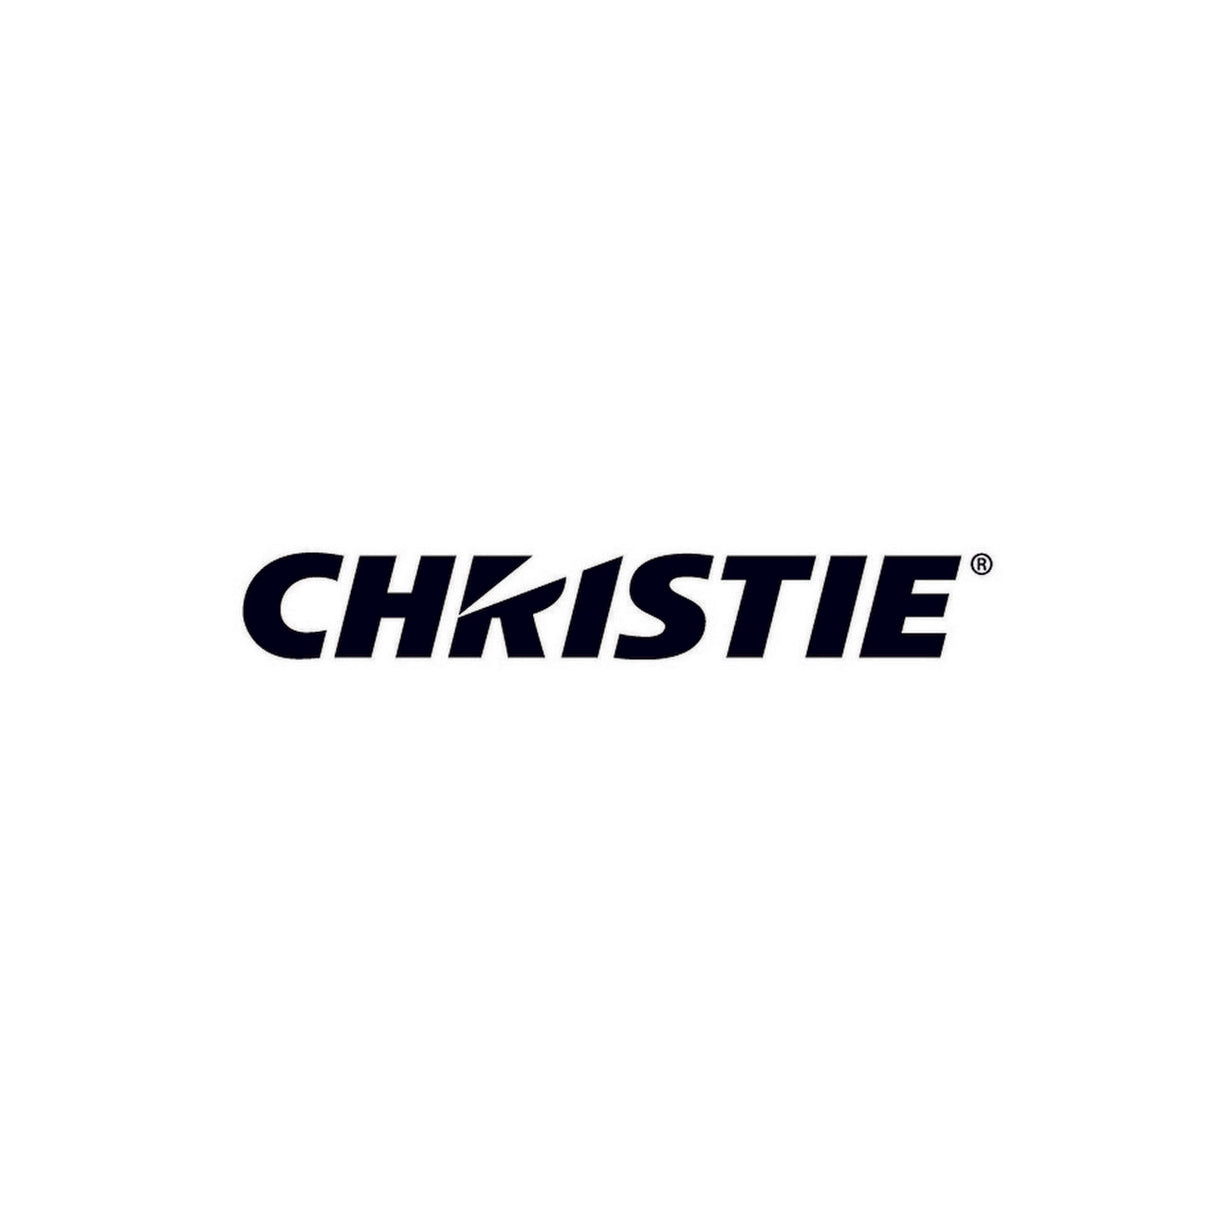 Christie 003-003704-01 | Projector Smoke Filter Kit for L2K1500